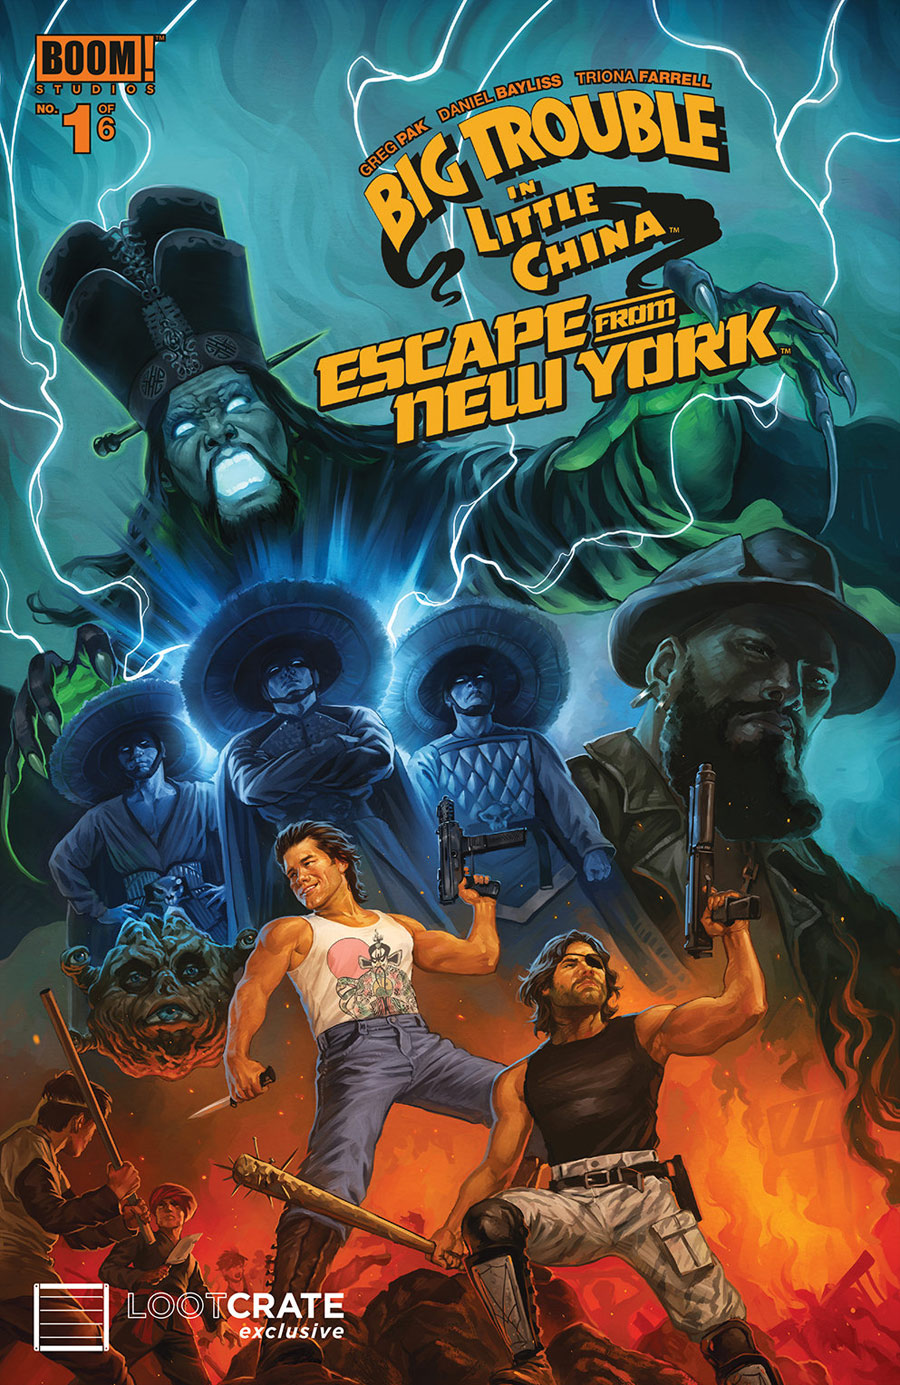 BIG TROUBLE IN LITTLE CHINA/ESCAPE FROM NEW YORK #1 Cover by Nick Robles